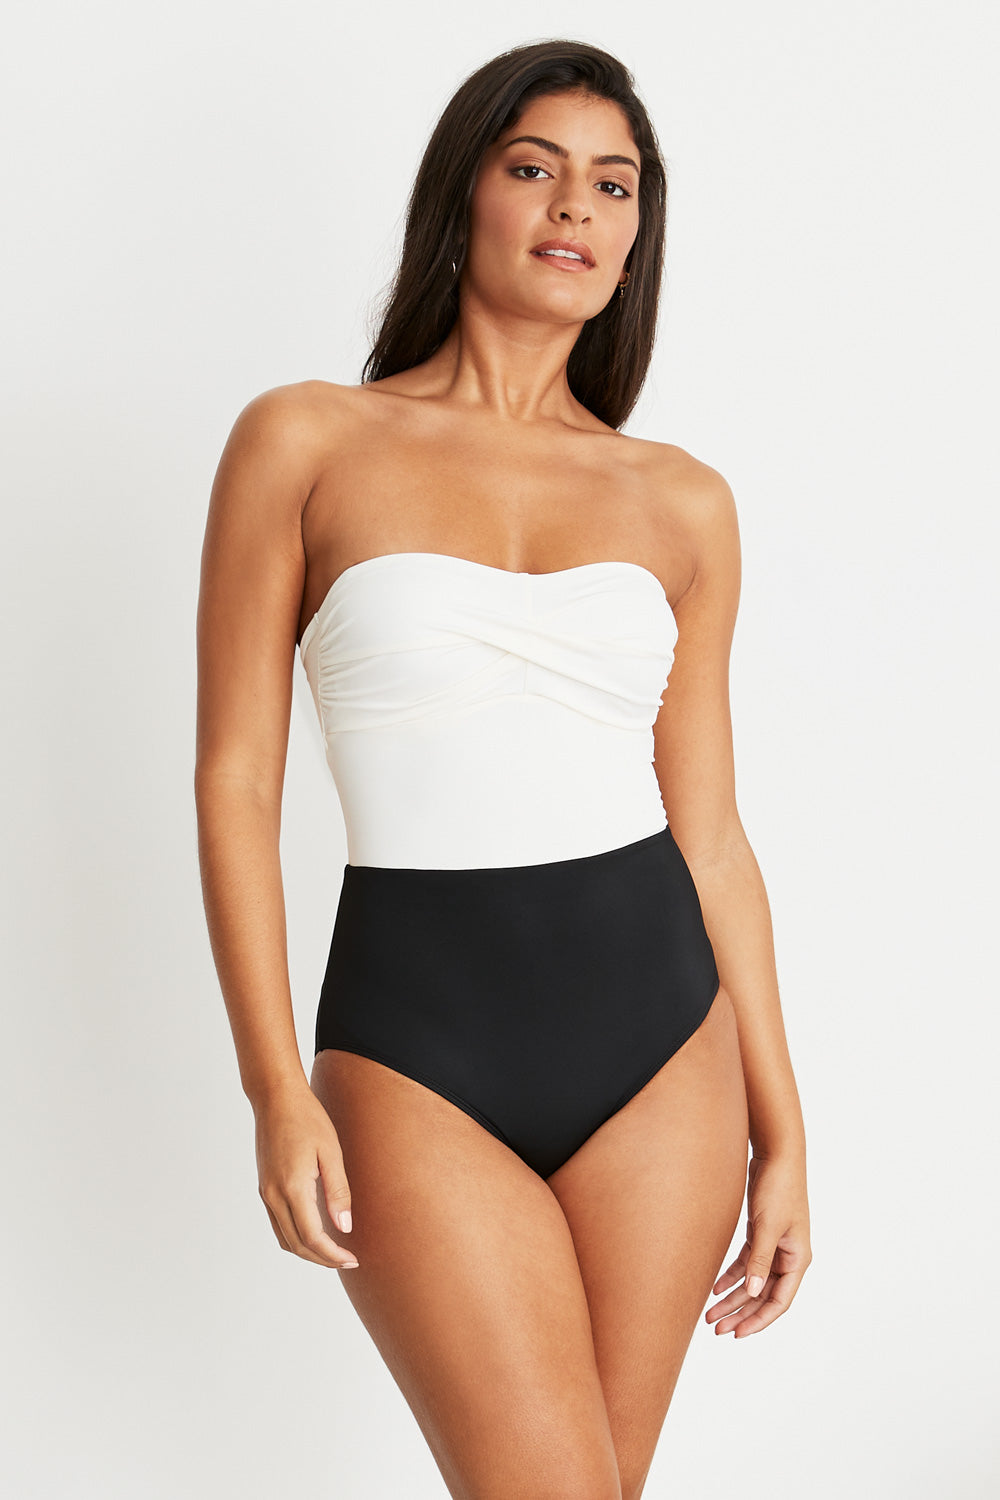 Best Swimwear For All Shapes & Sizes – Hermoza